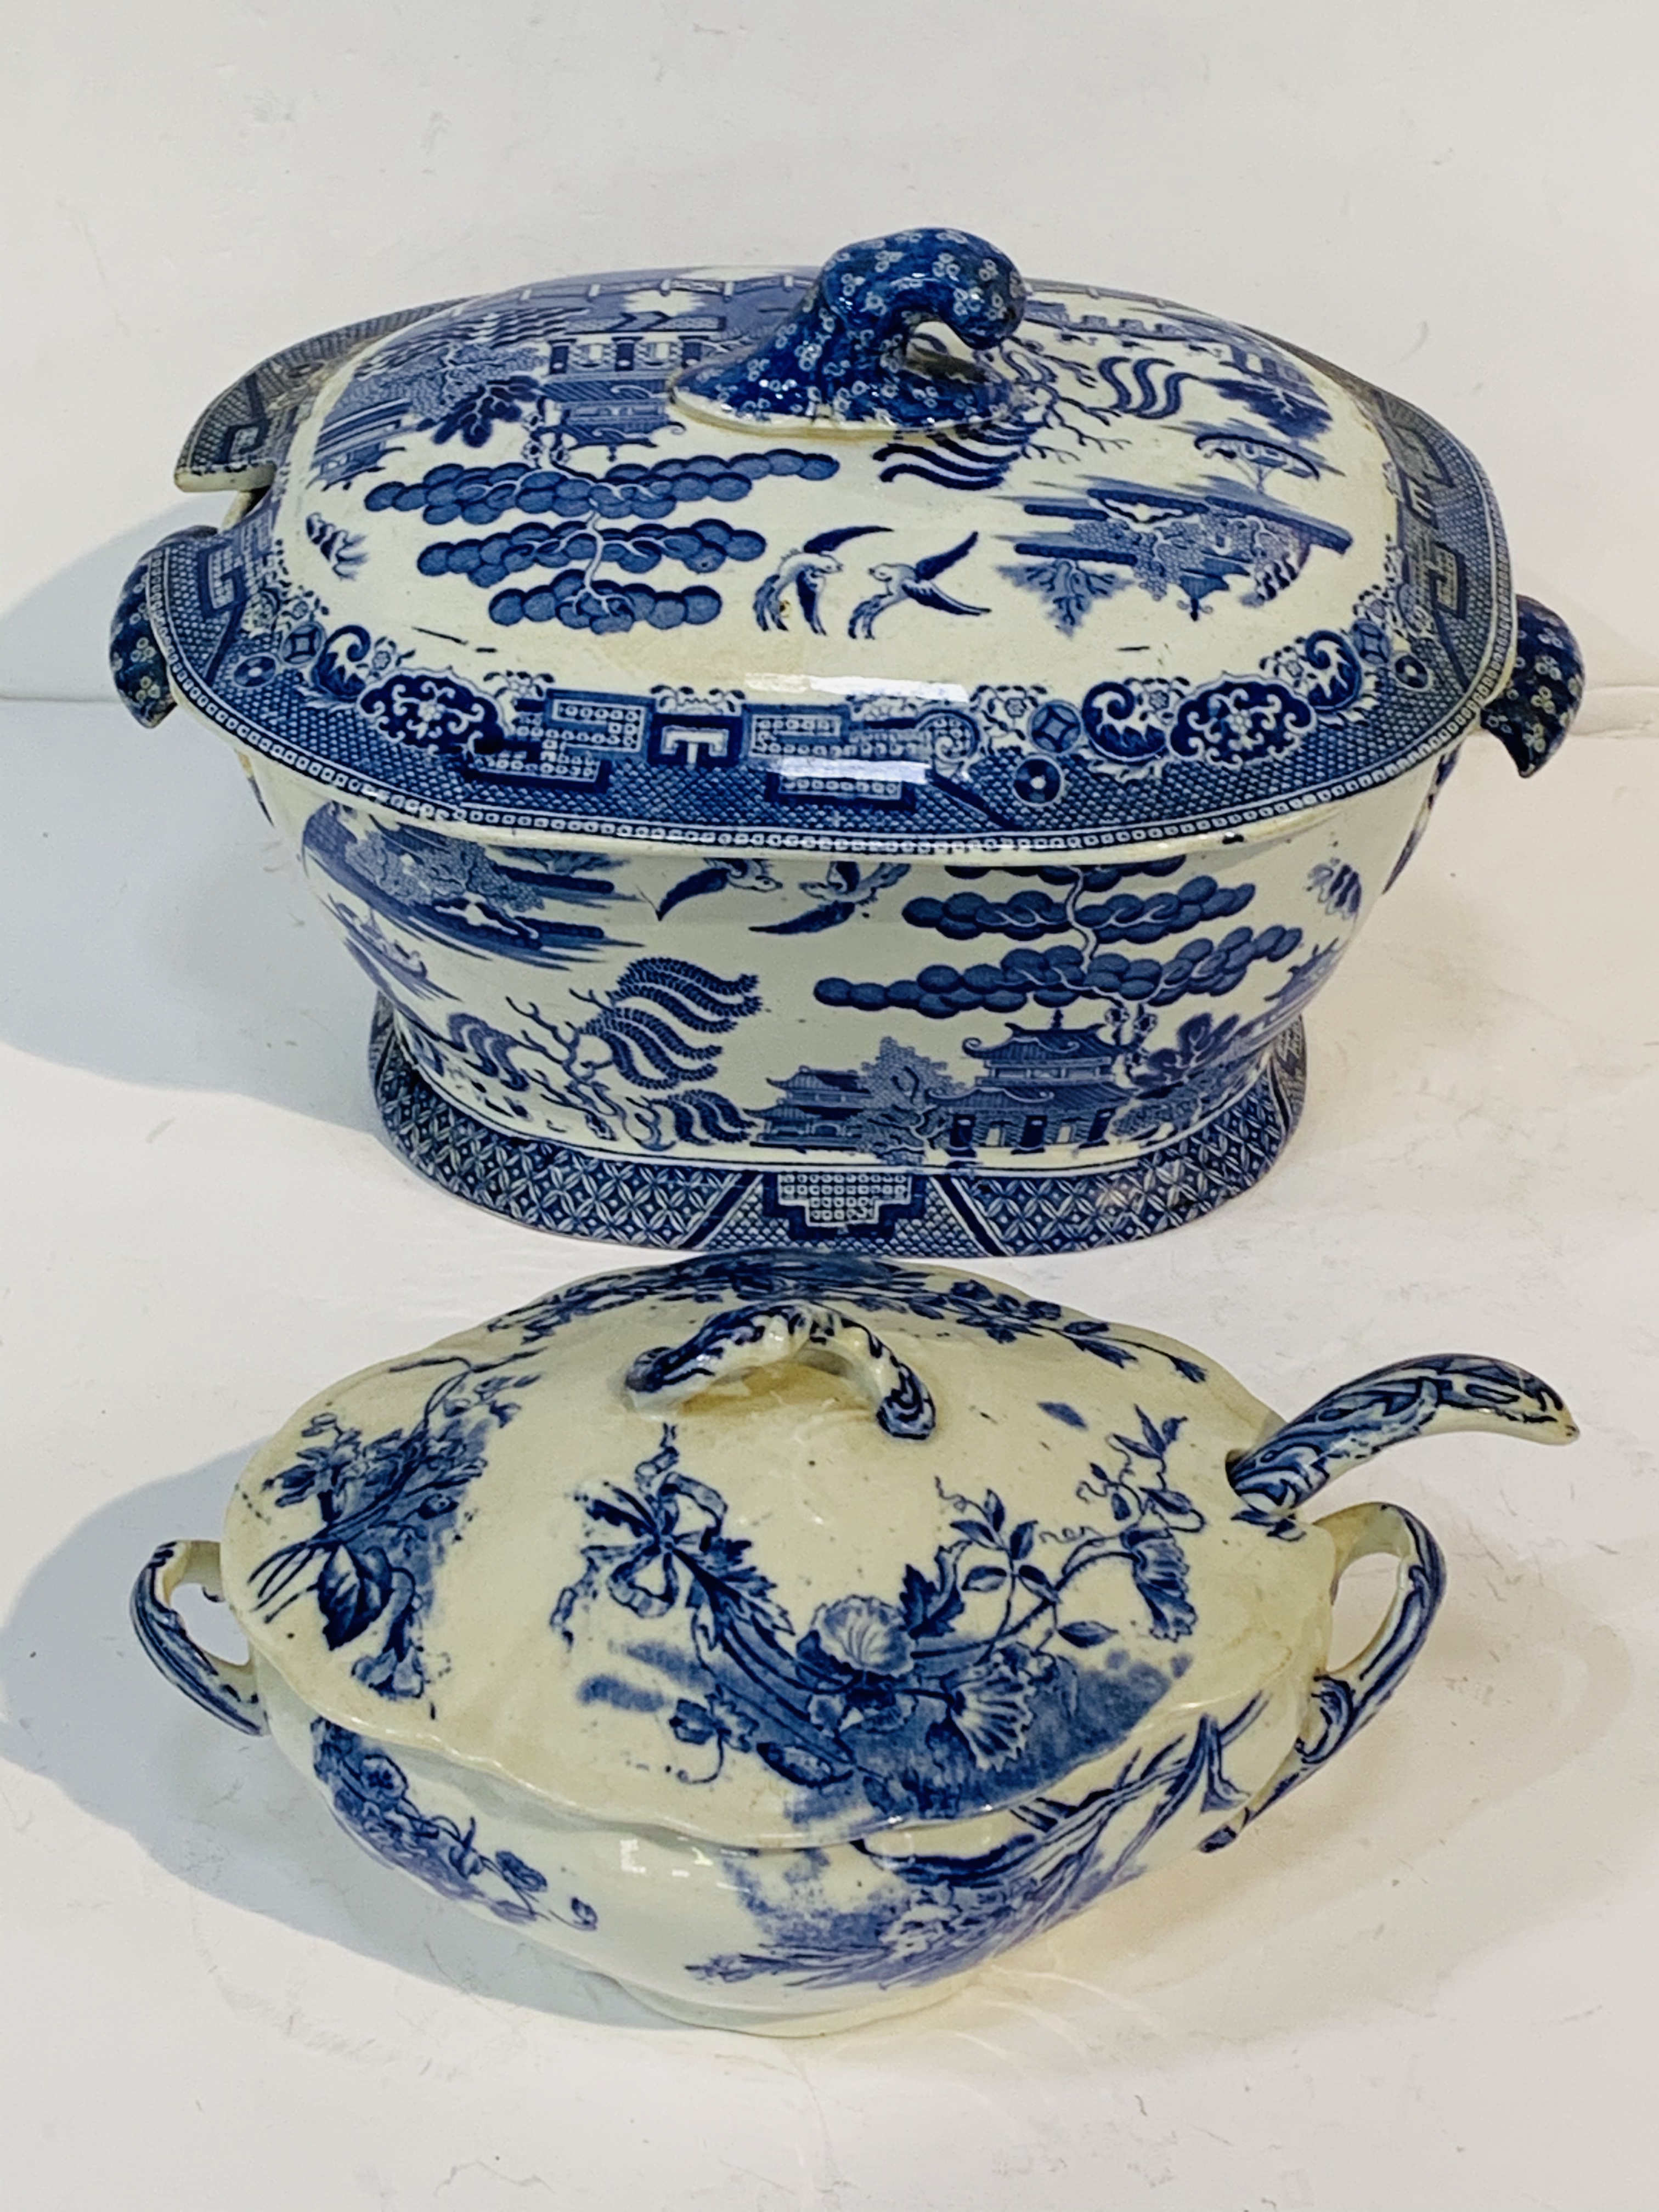 Willow pattern covered tureen; with a blue and white Doulton, Burslem "Sydenham" covered tureen.